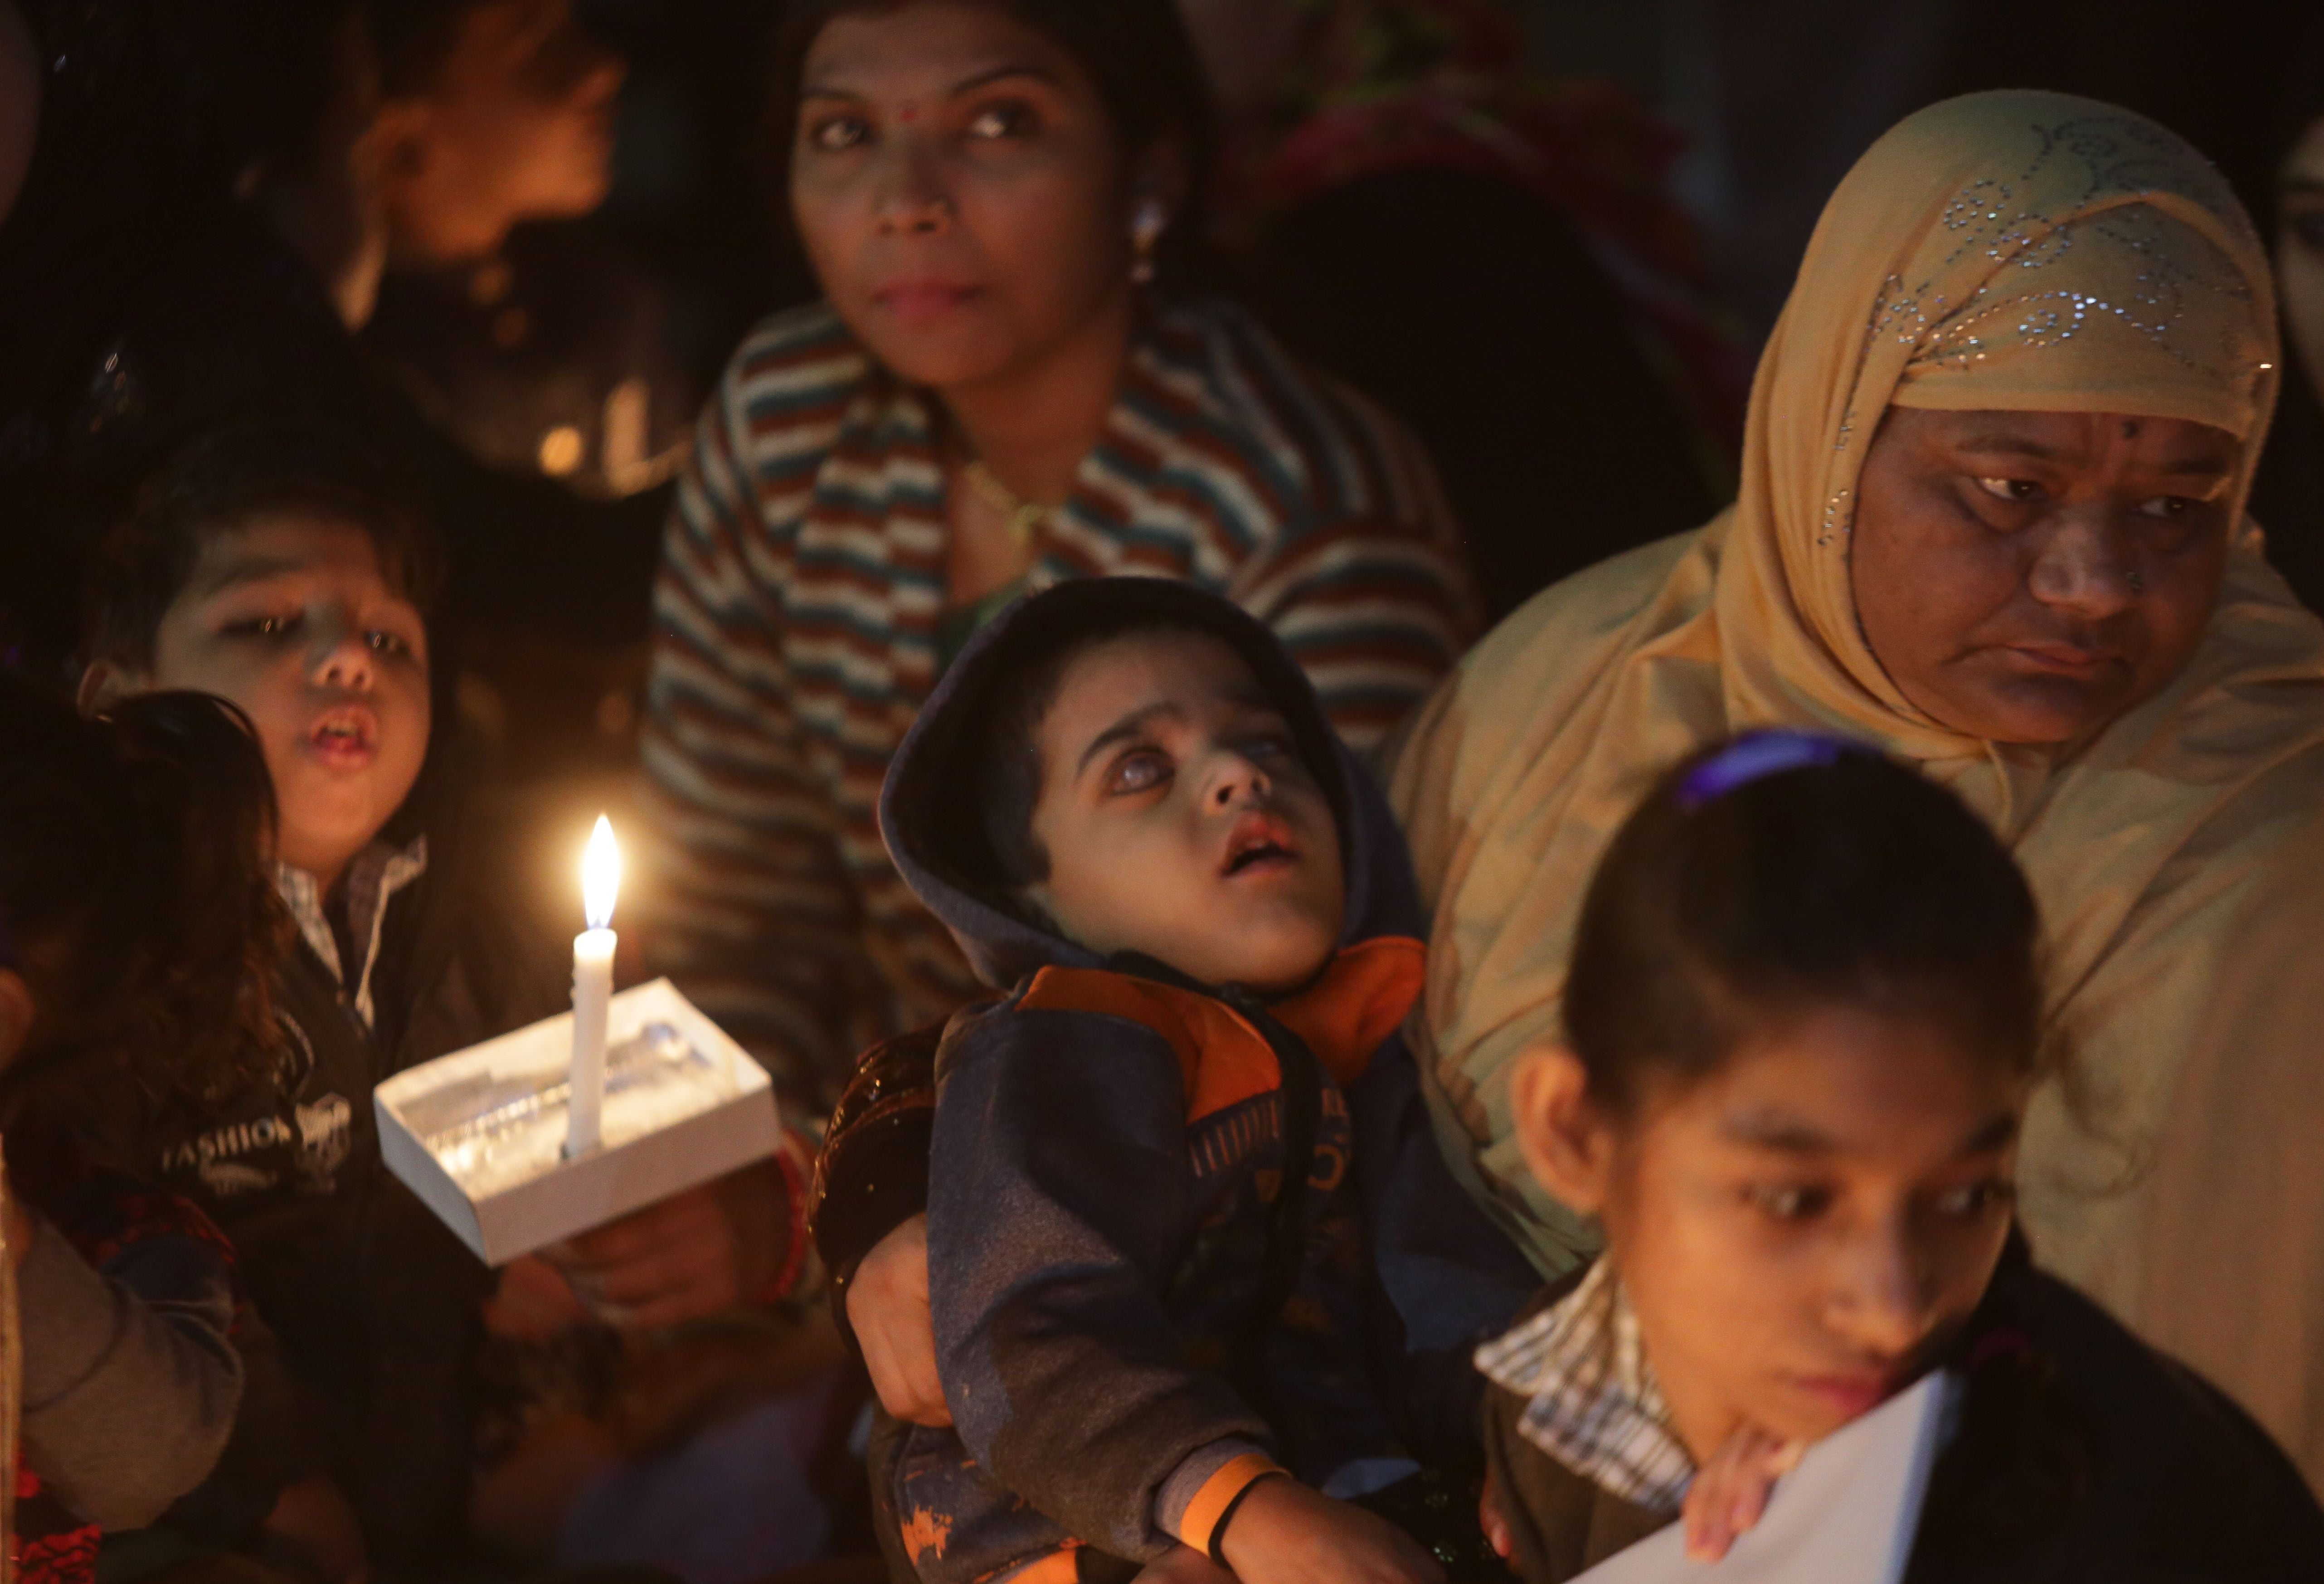 A candlelight vigil in 2018 to remember the Bhopal gas disaster